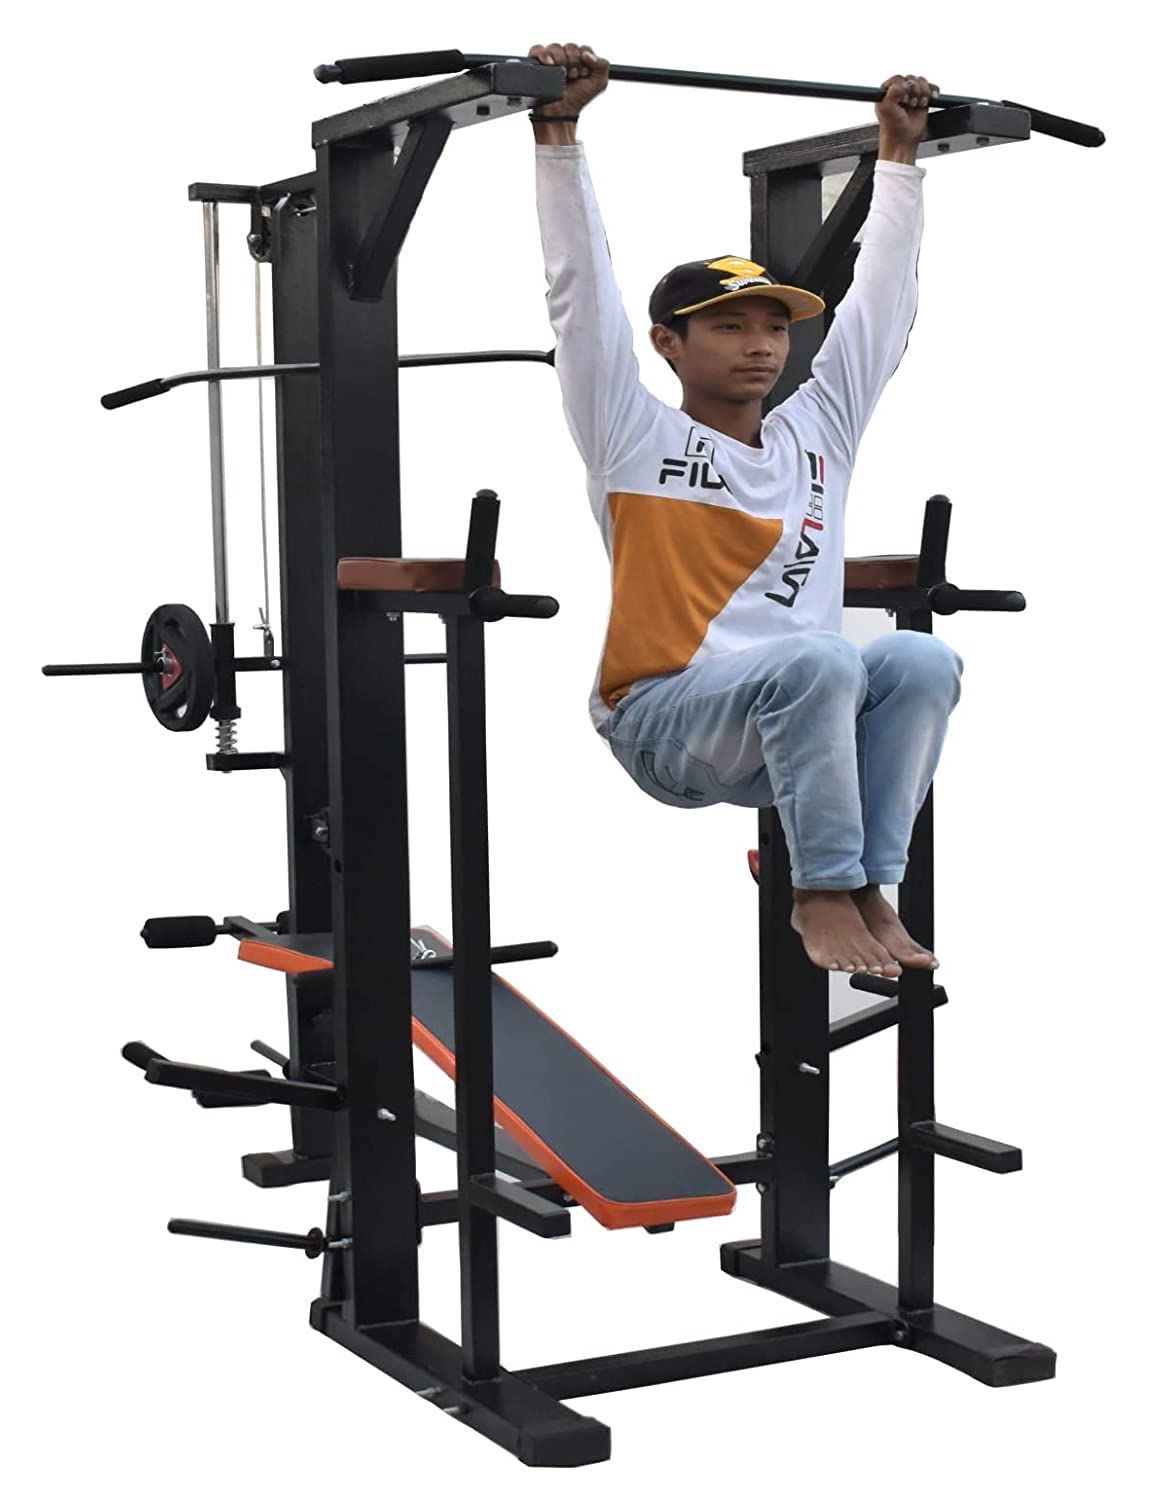 HASHTAG FITNESS ABS tower exercise bench